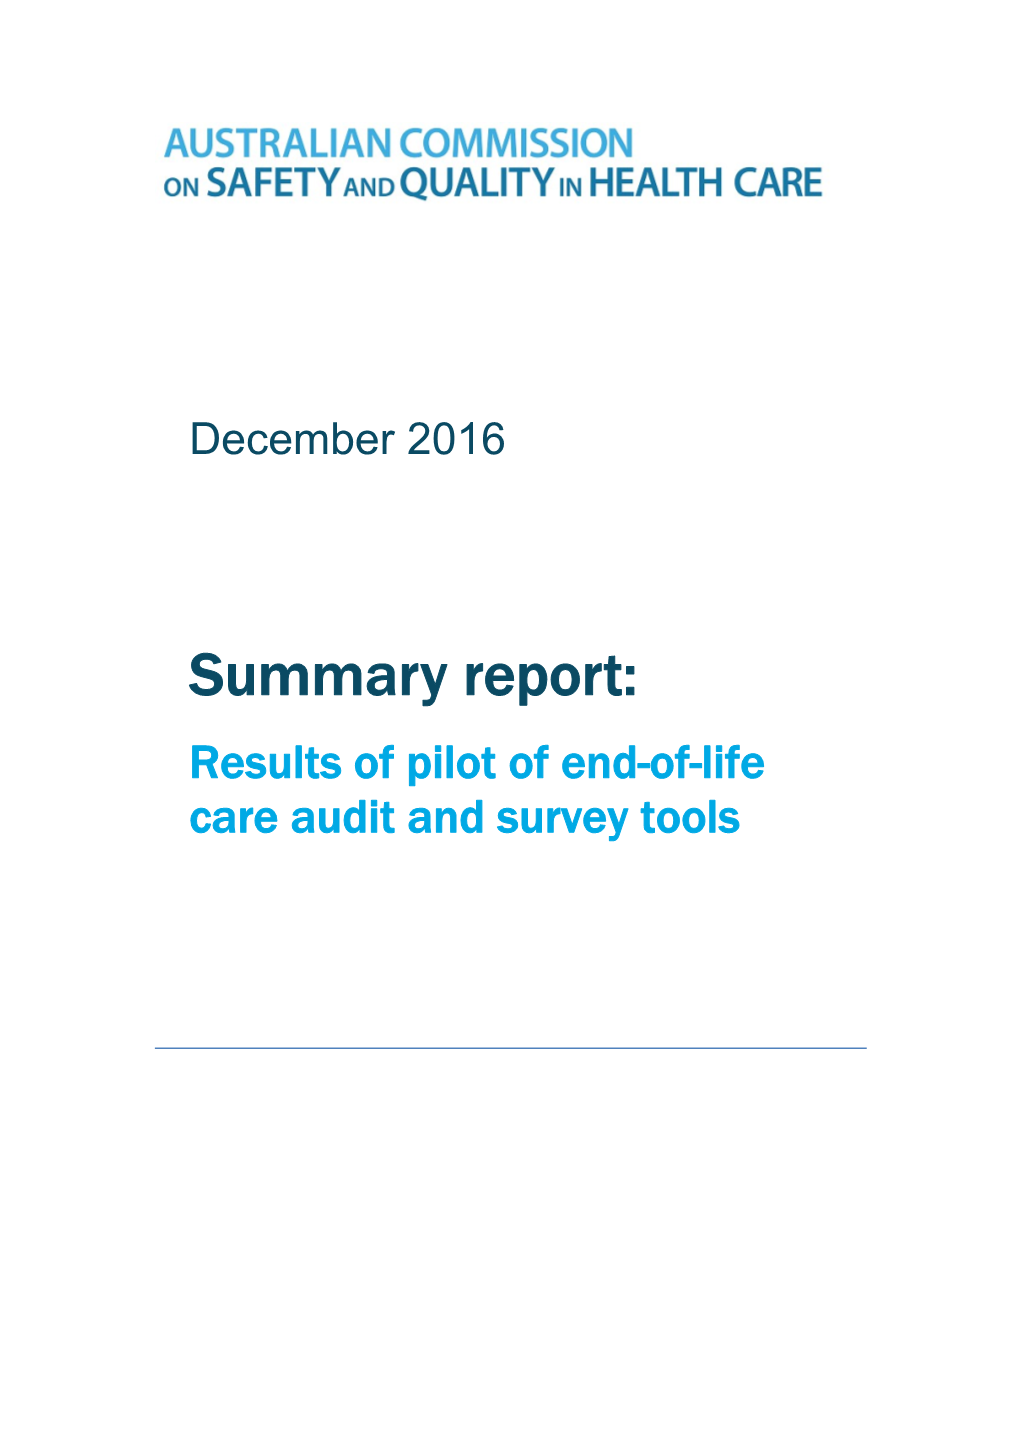 Results Ofpilotof End-Of-Life Care Audit and Survey Tools